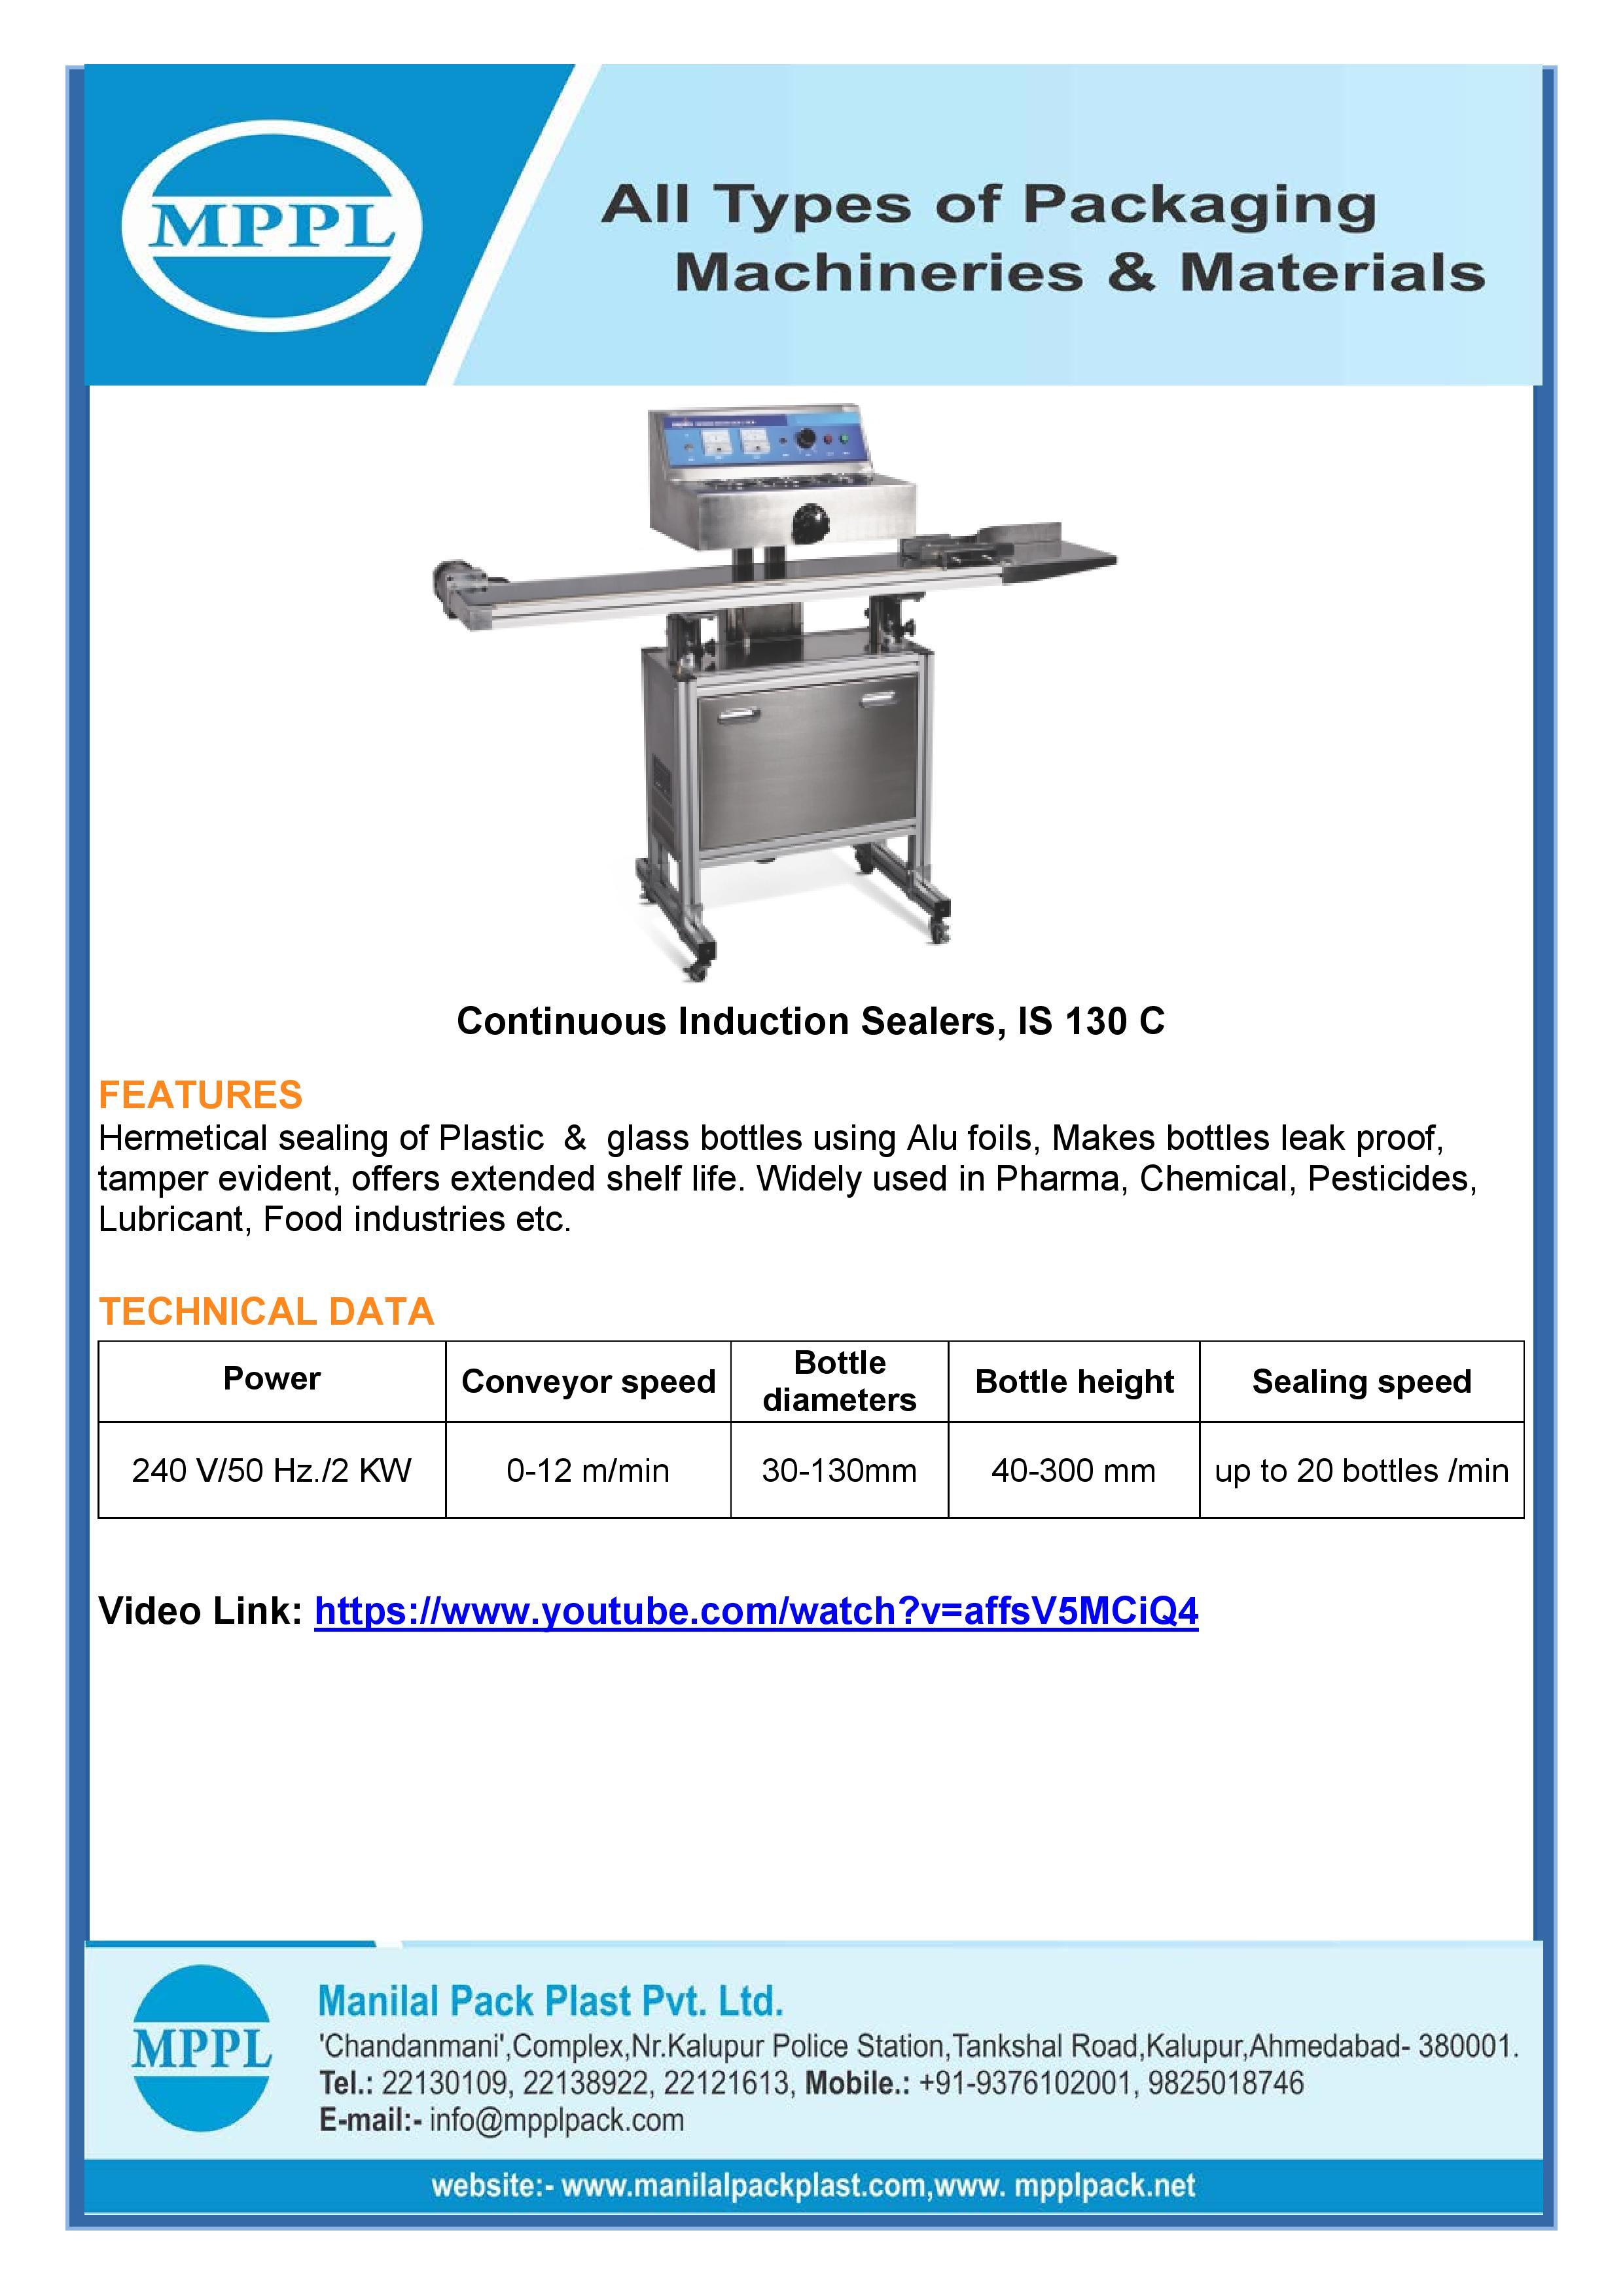 Continuous Induction Sealing Machine IS 130 C